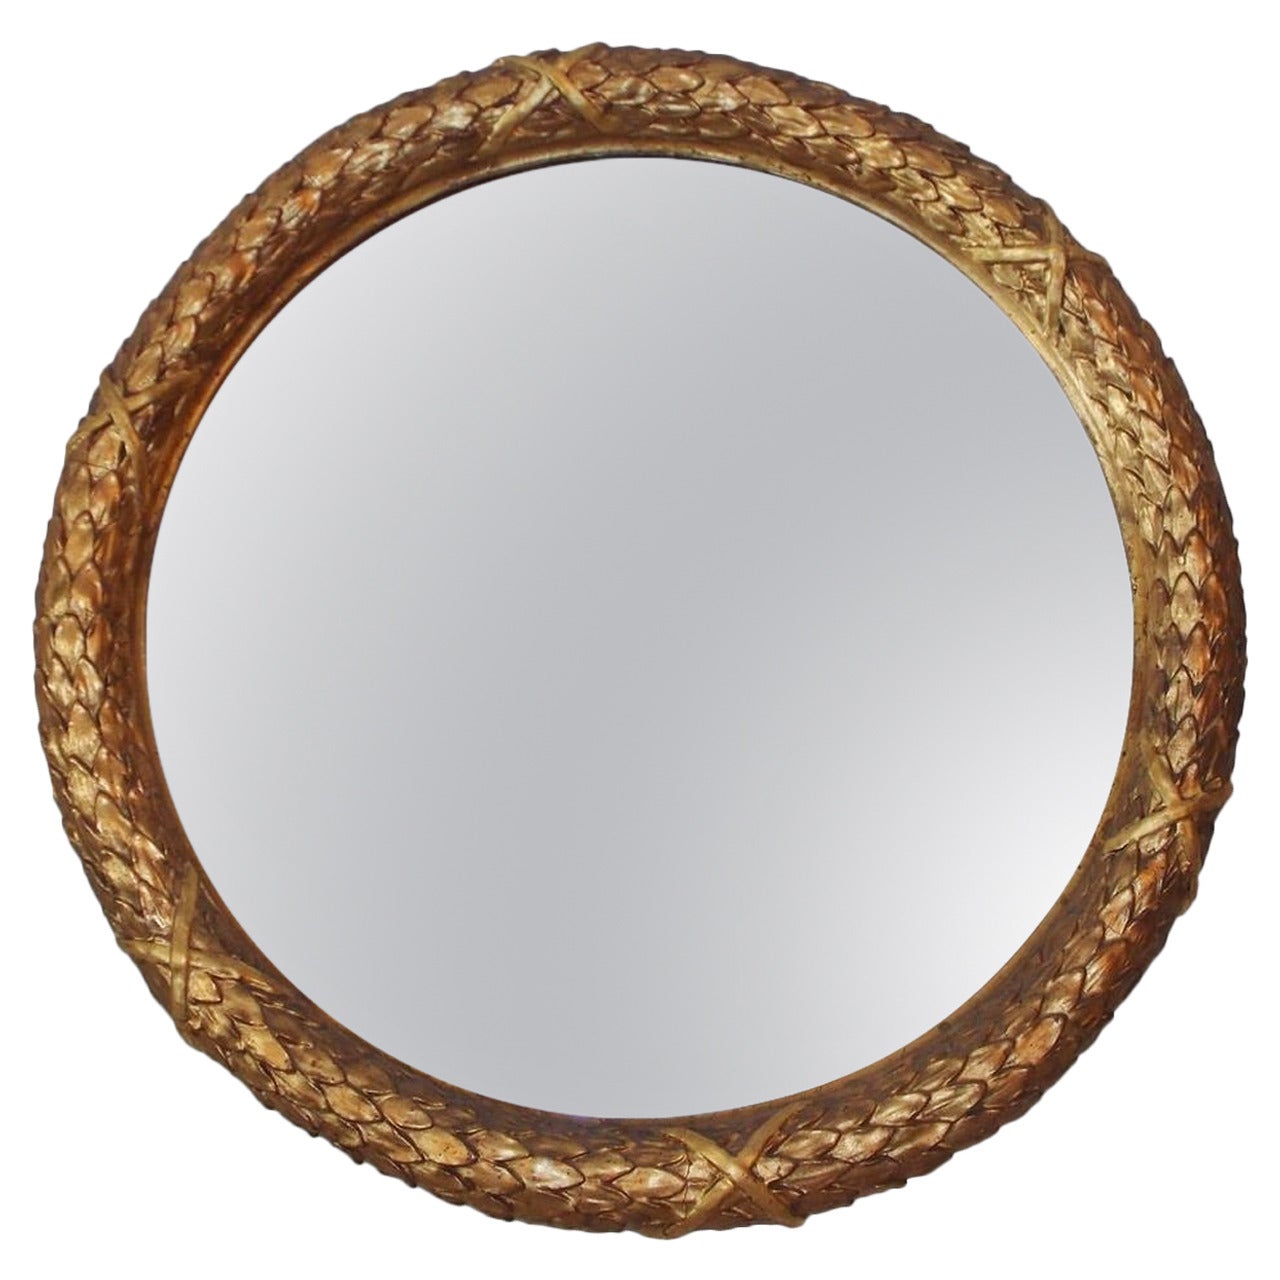 French Gilt Carved Wood Floral Mirror, Circa 1820